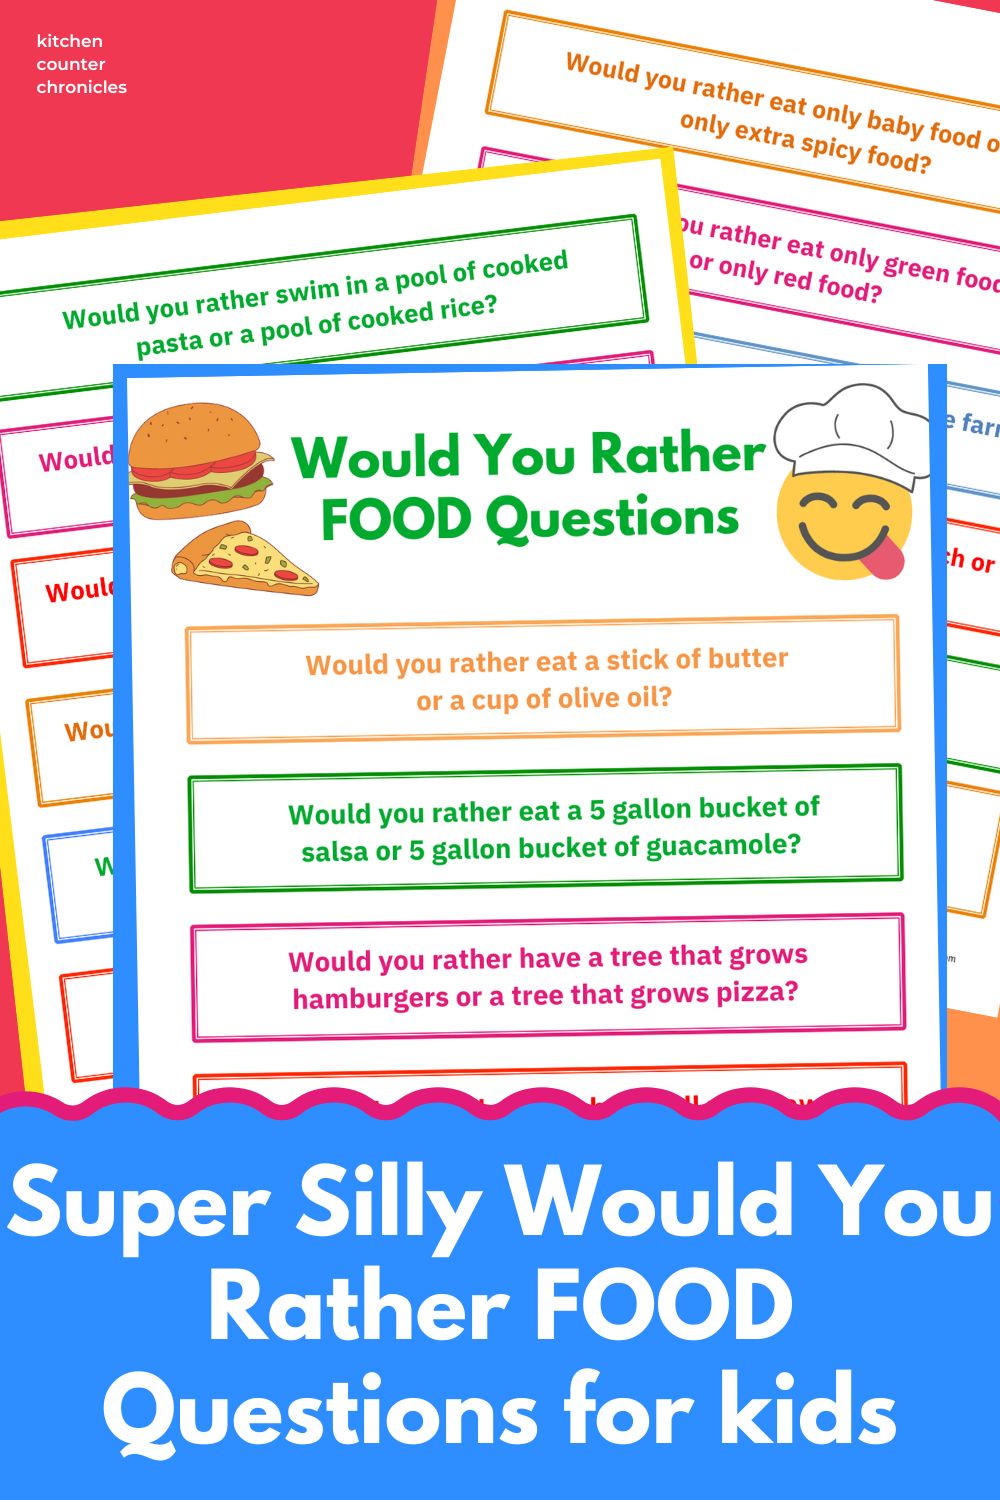 3 sheets of printable would you rather food questions with the title "Super Silly Would You Rather Food Questions for Kids"